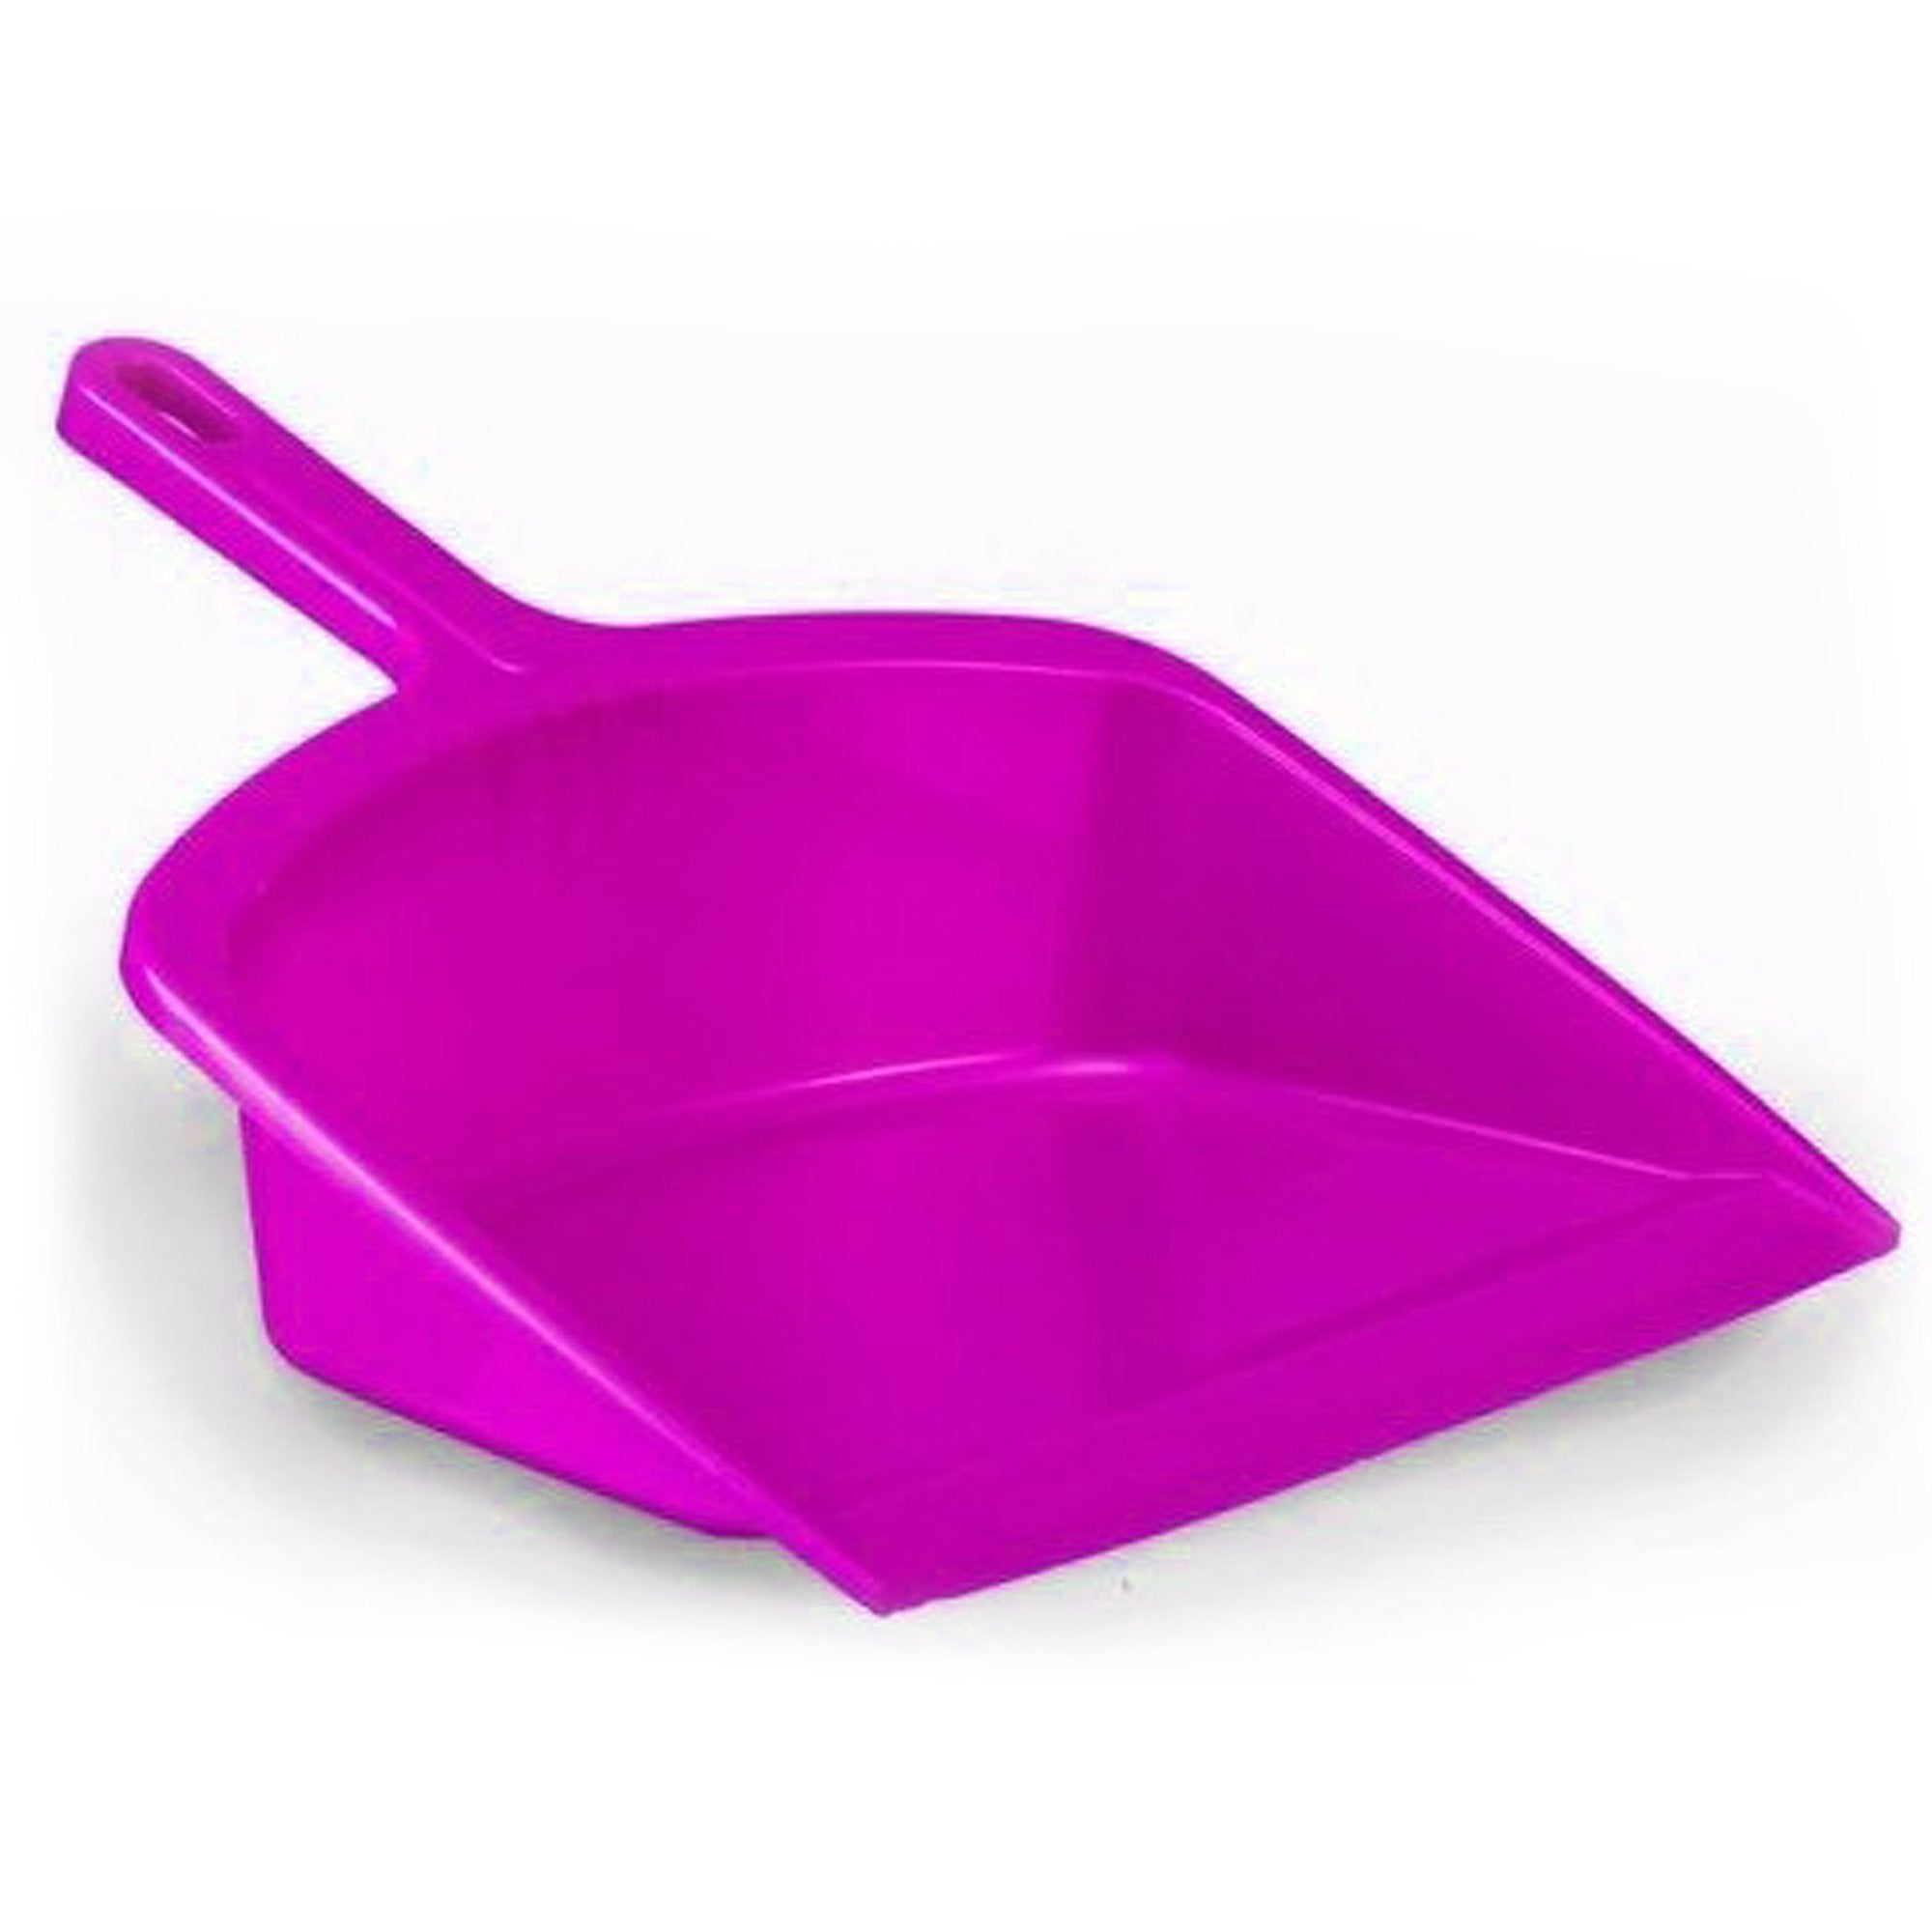 2352 Durable Multi Surface Plastic Dustpan with Handle - SkyShopy